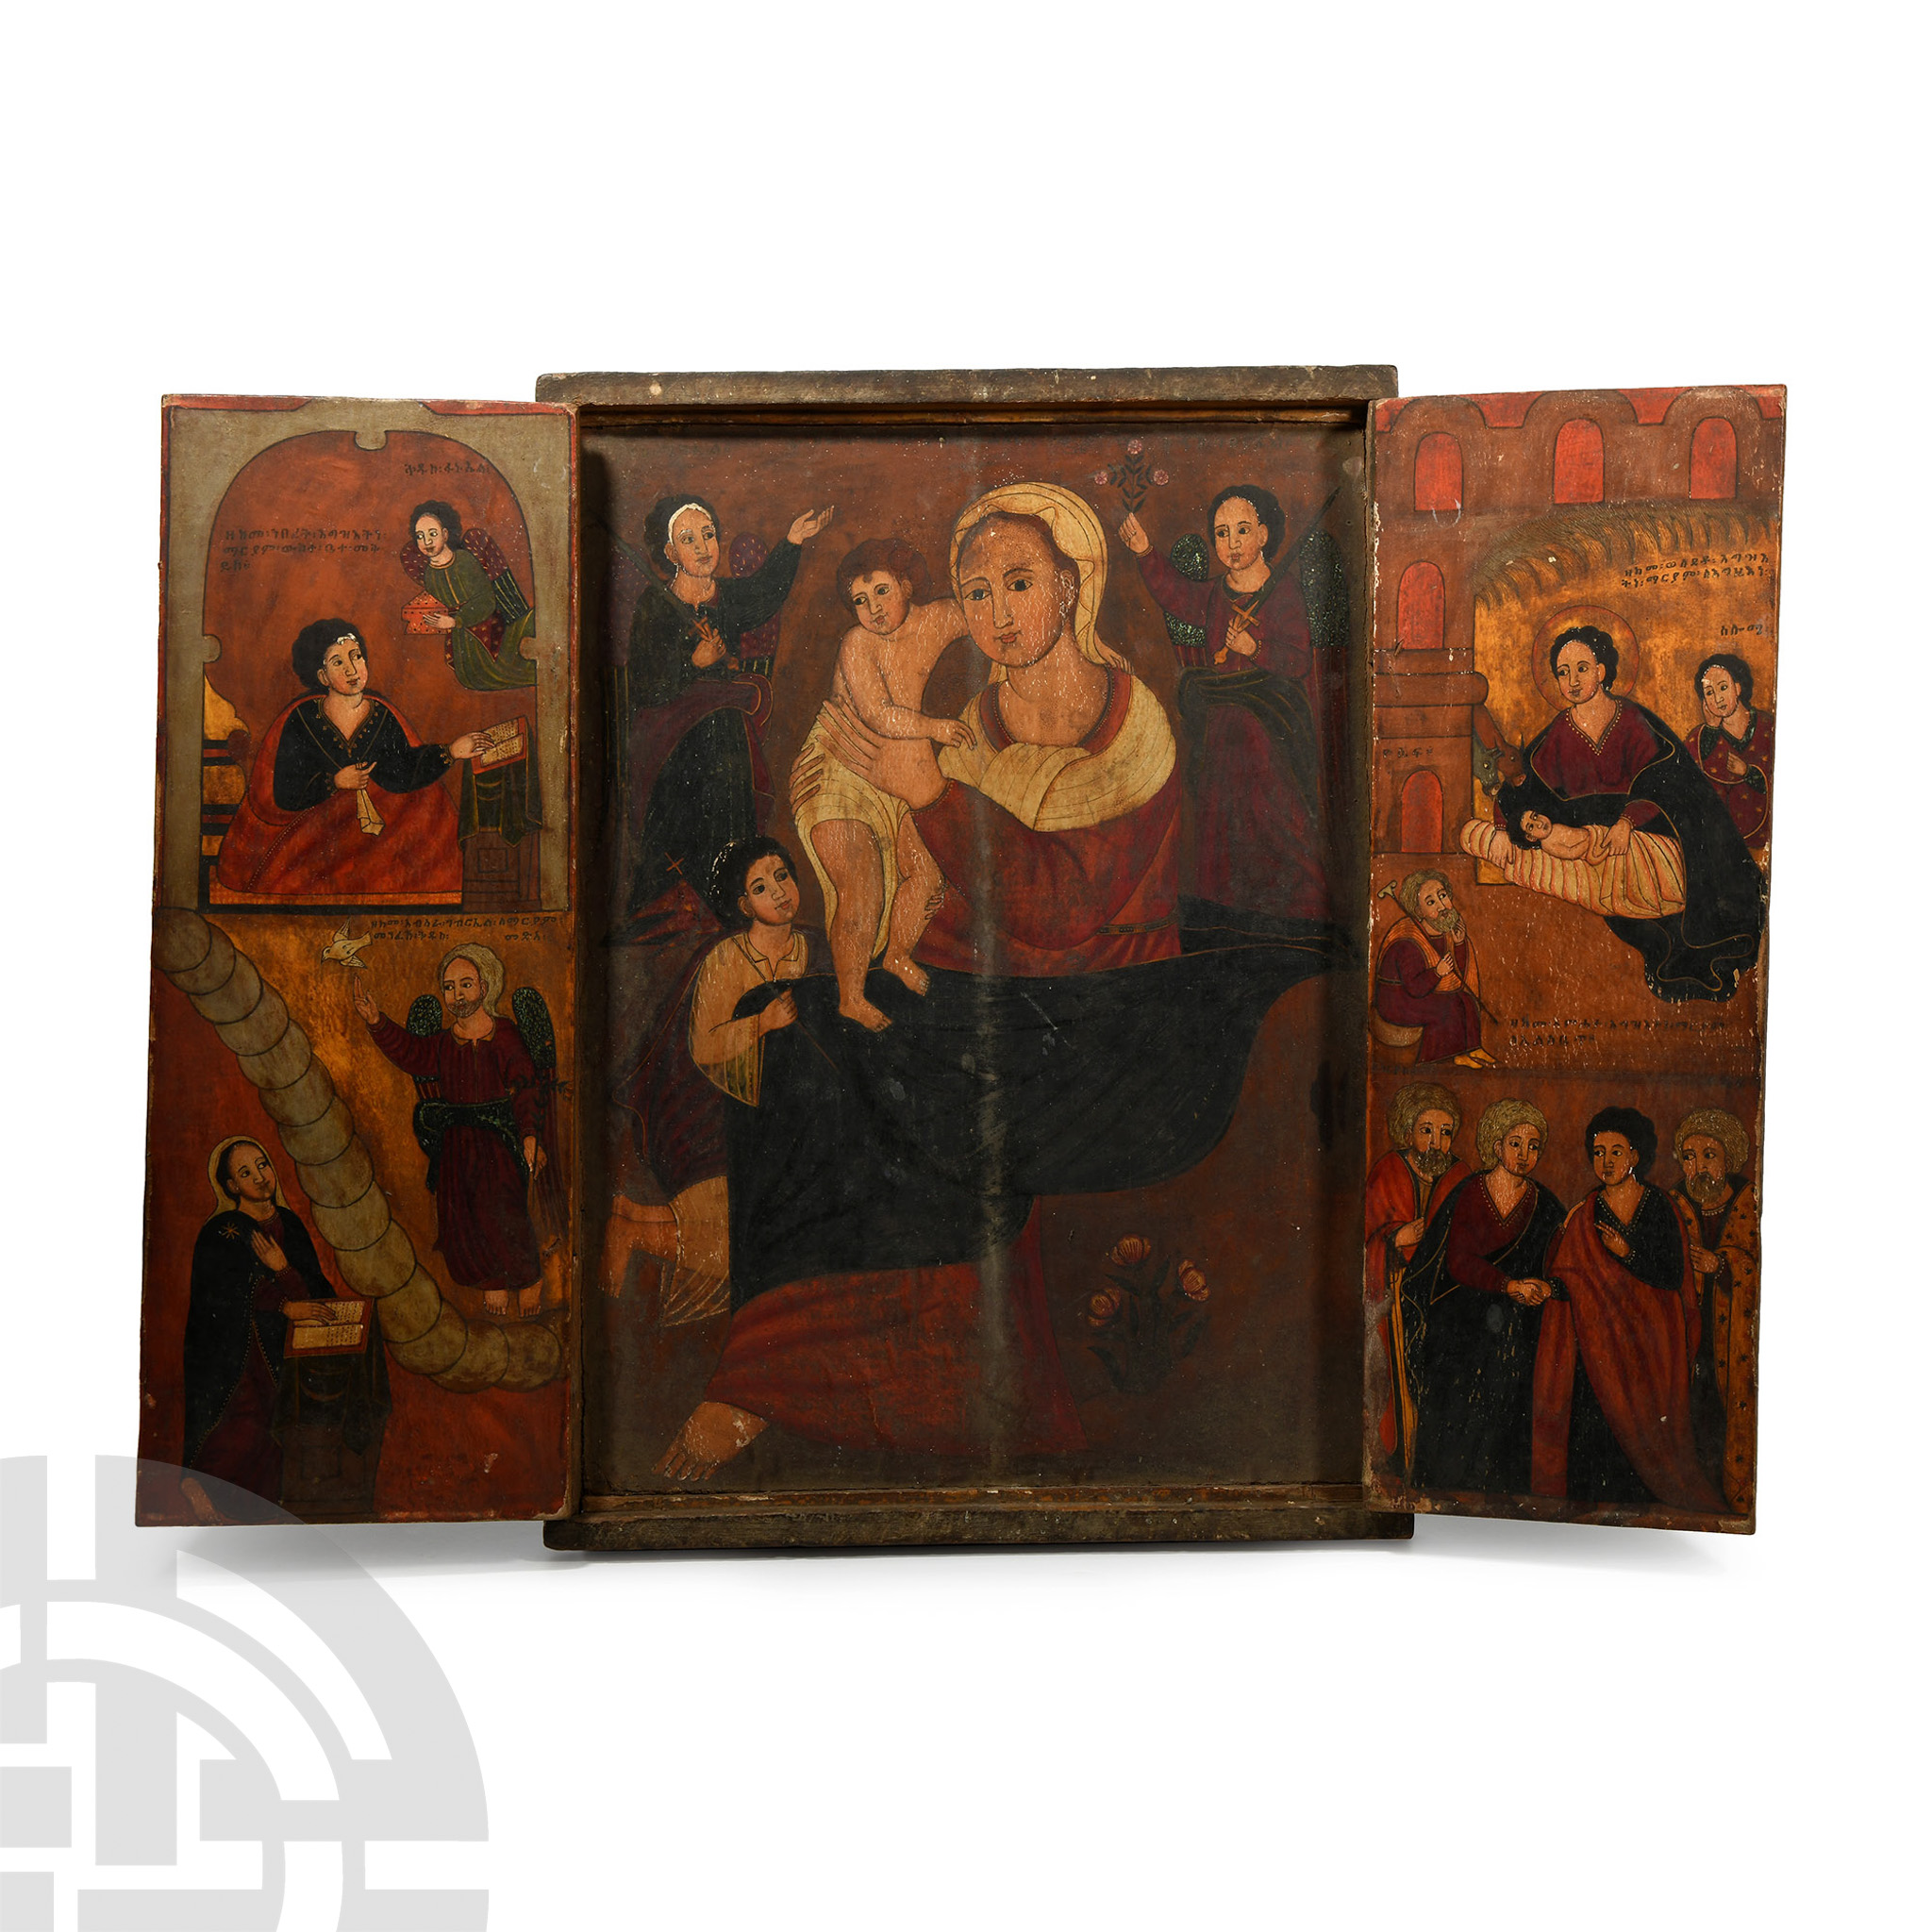 Large Ethiopian Triptych Icon with the Virgin and Child - Image 6 of 6